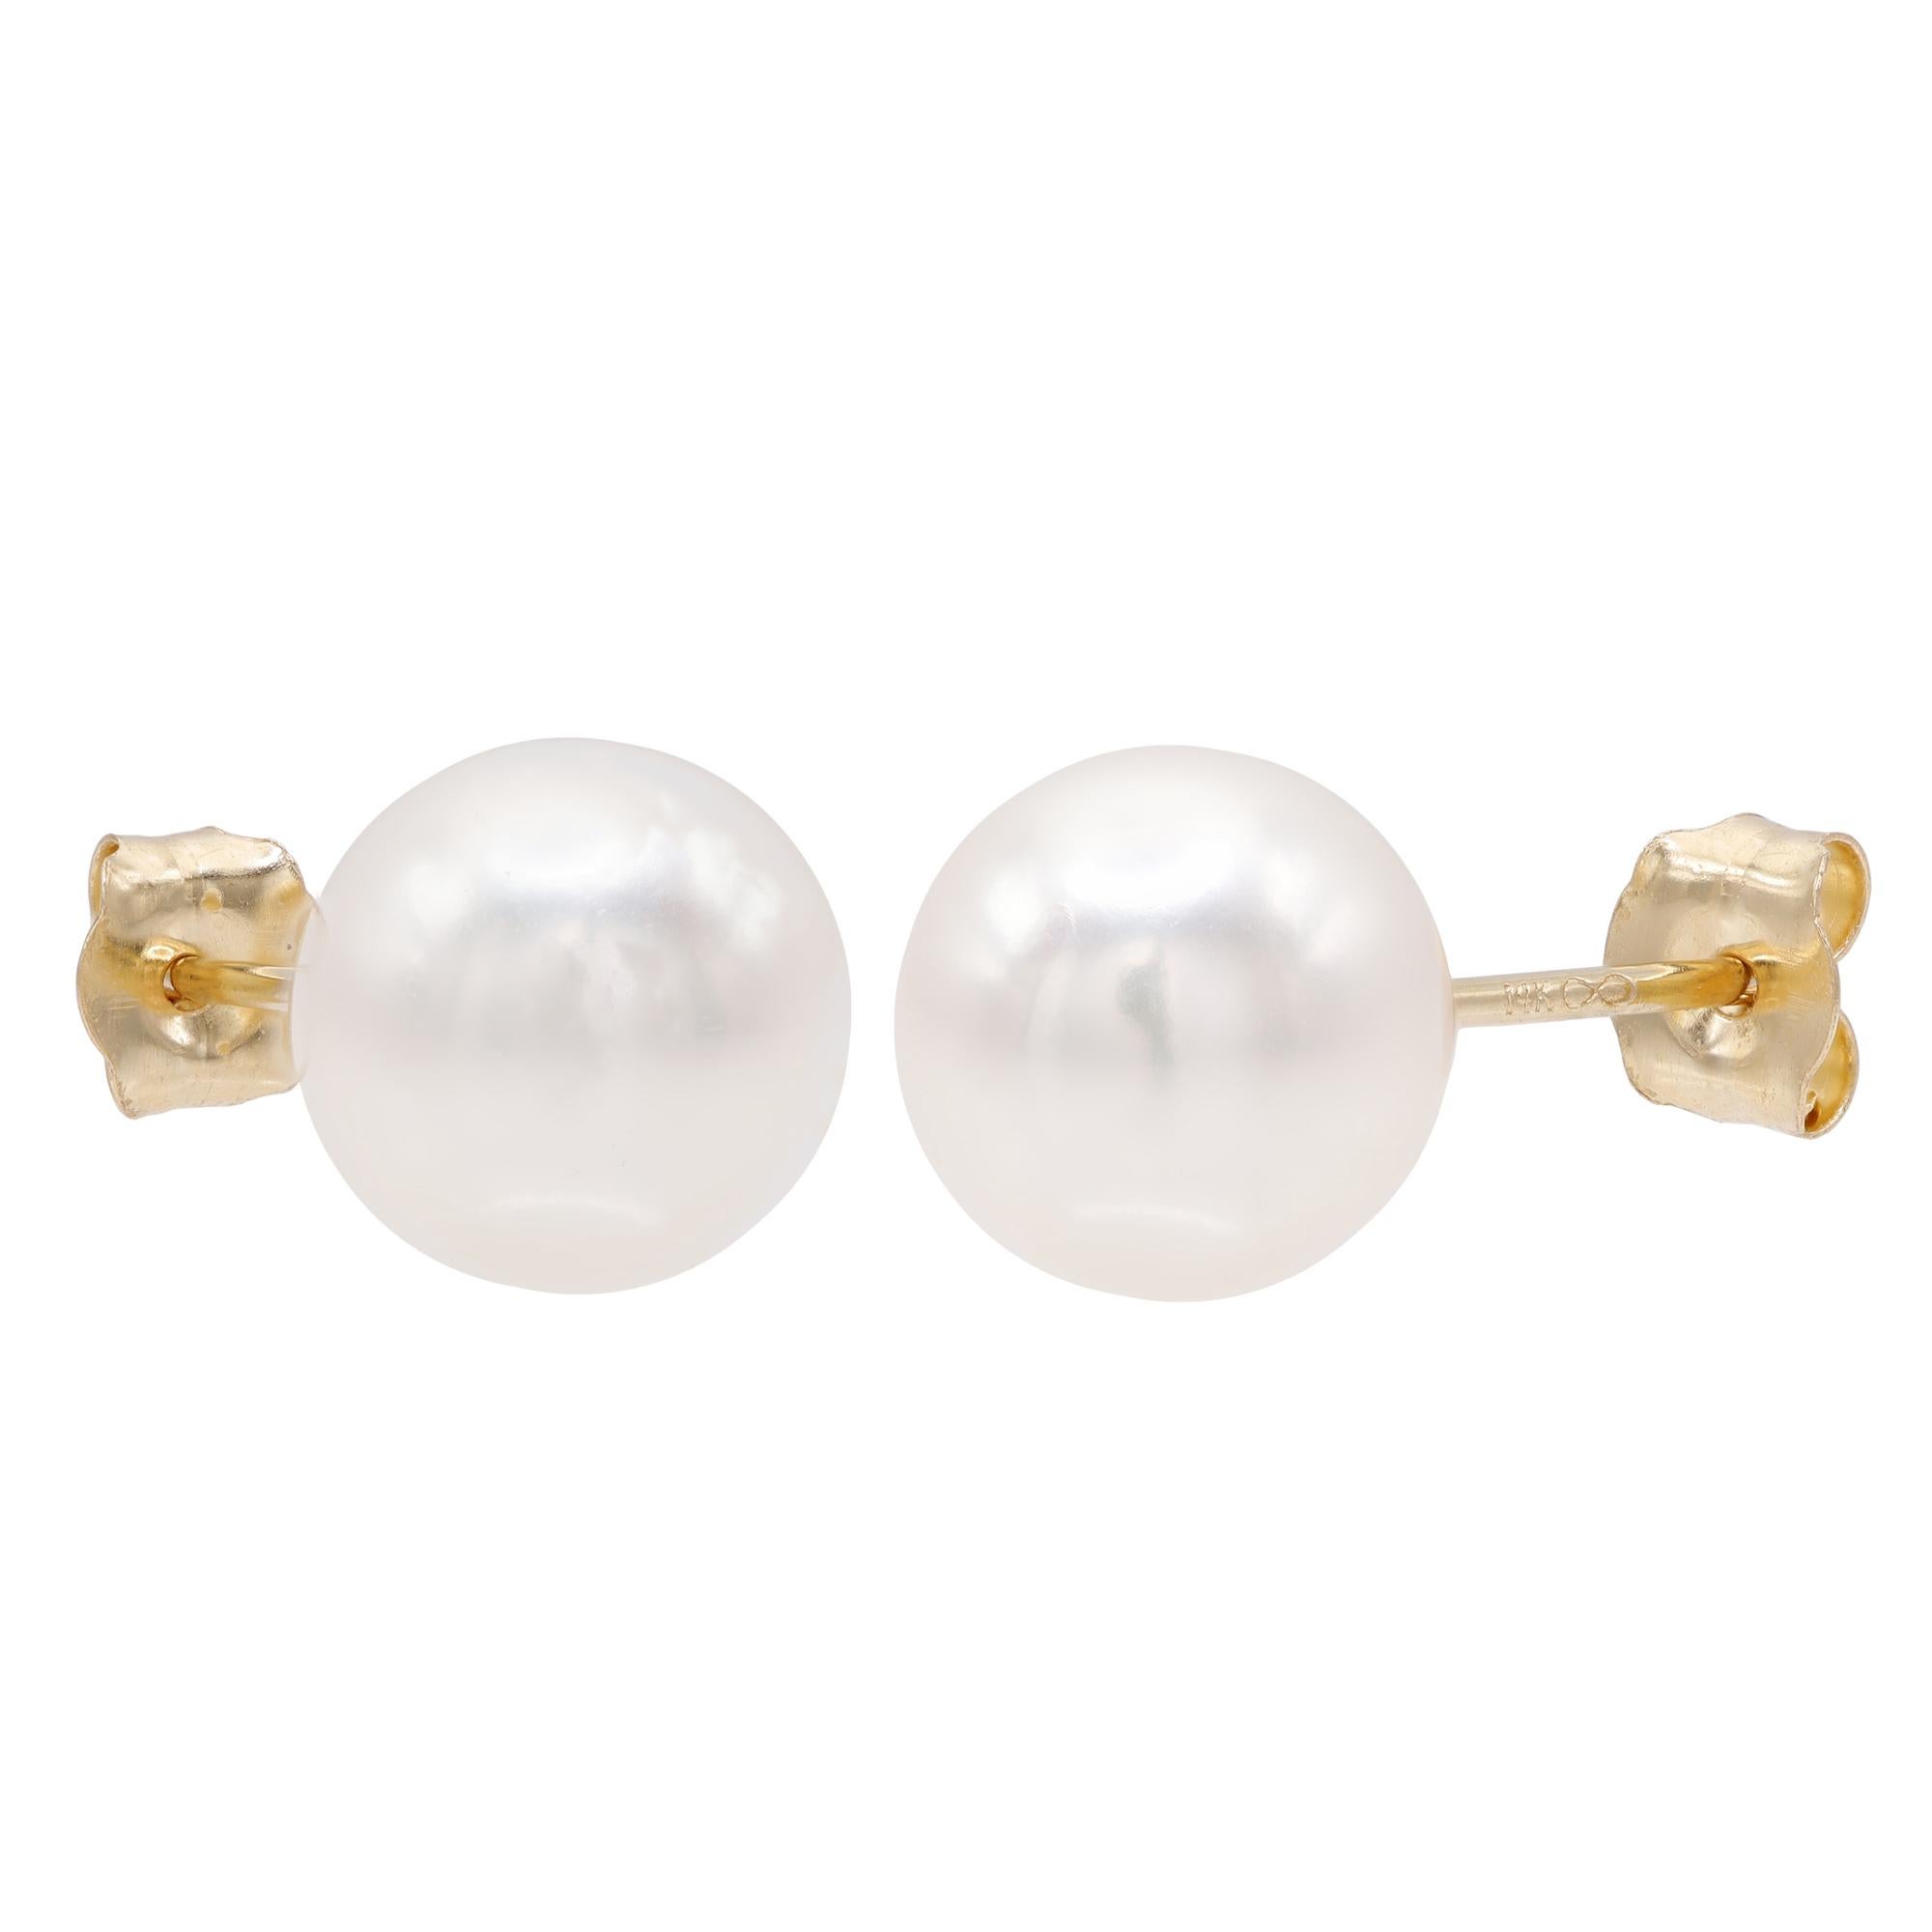 Simple and elegant, these pearl stud earrings are a must have accessory. Showcasing white fresh water pearls. These earrings are crafted in 14k yellow gold. Secured with push back posts. Earring size: 7.3mm. Total weight: 1.38 grams. Makes a perfect